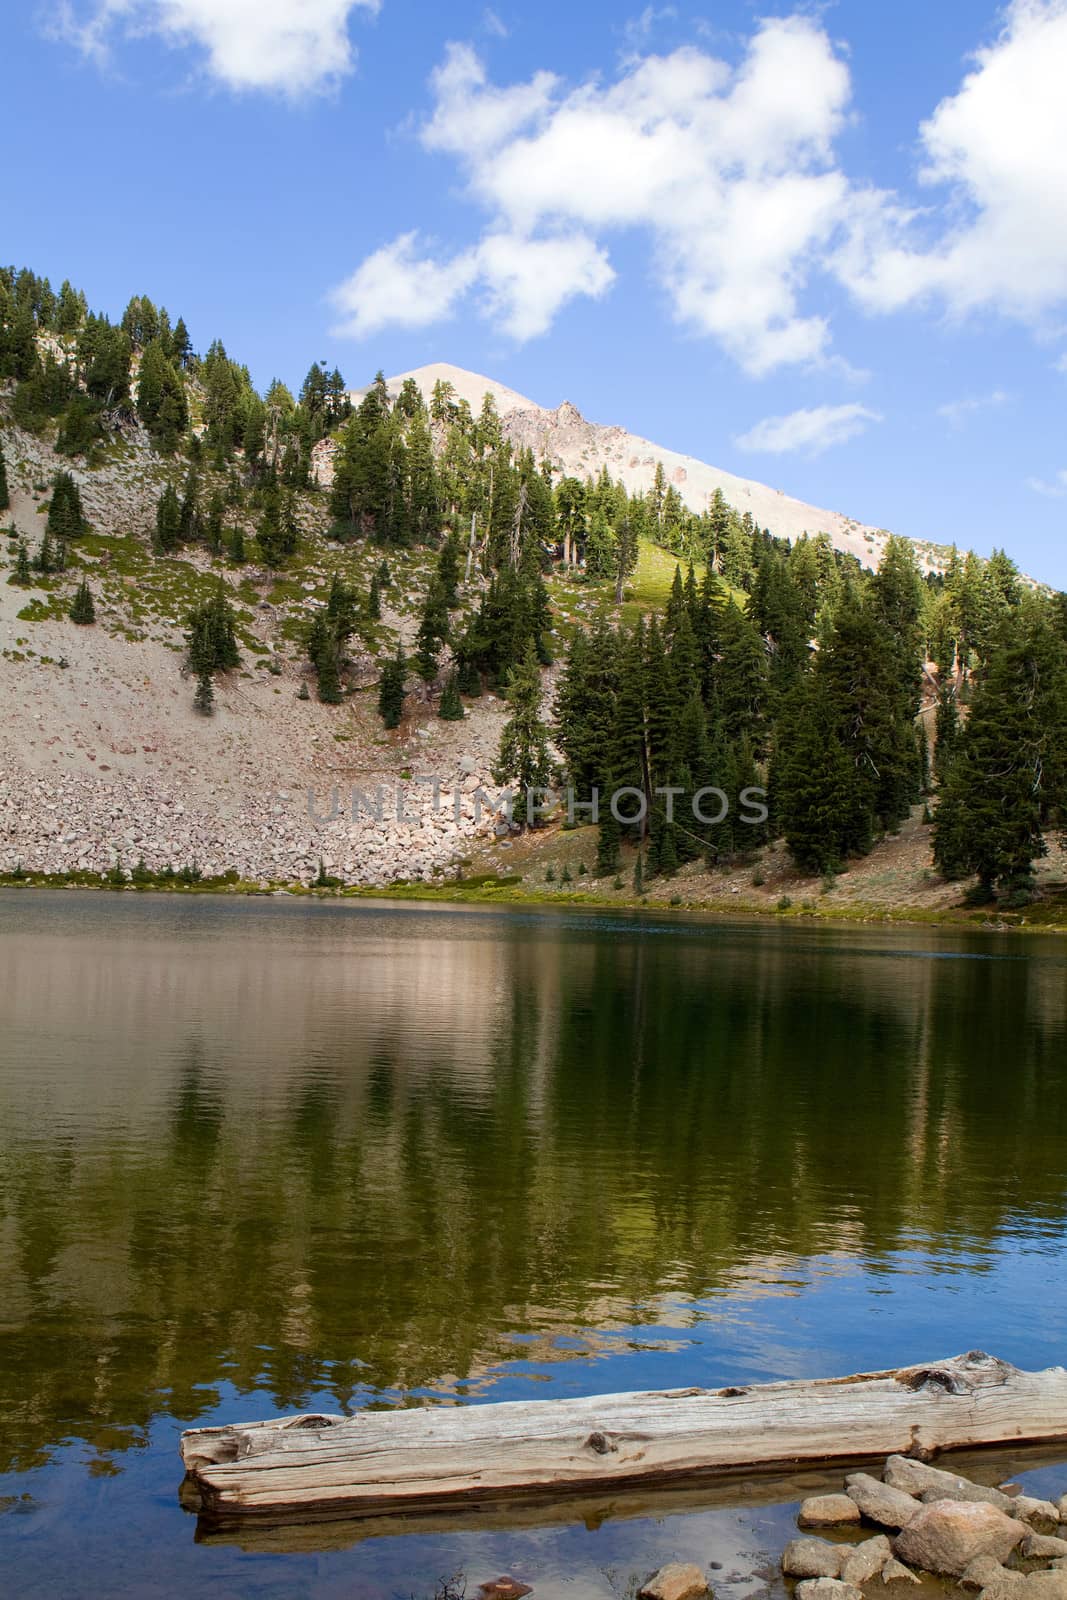 Reflections on Emerald Lake in Lassen Volcanic National Park in northeastern California, USA.